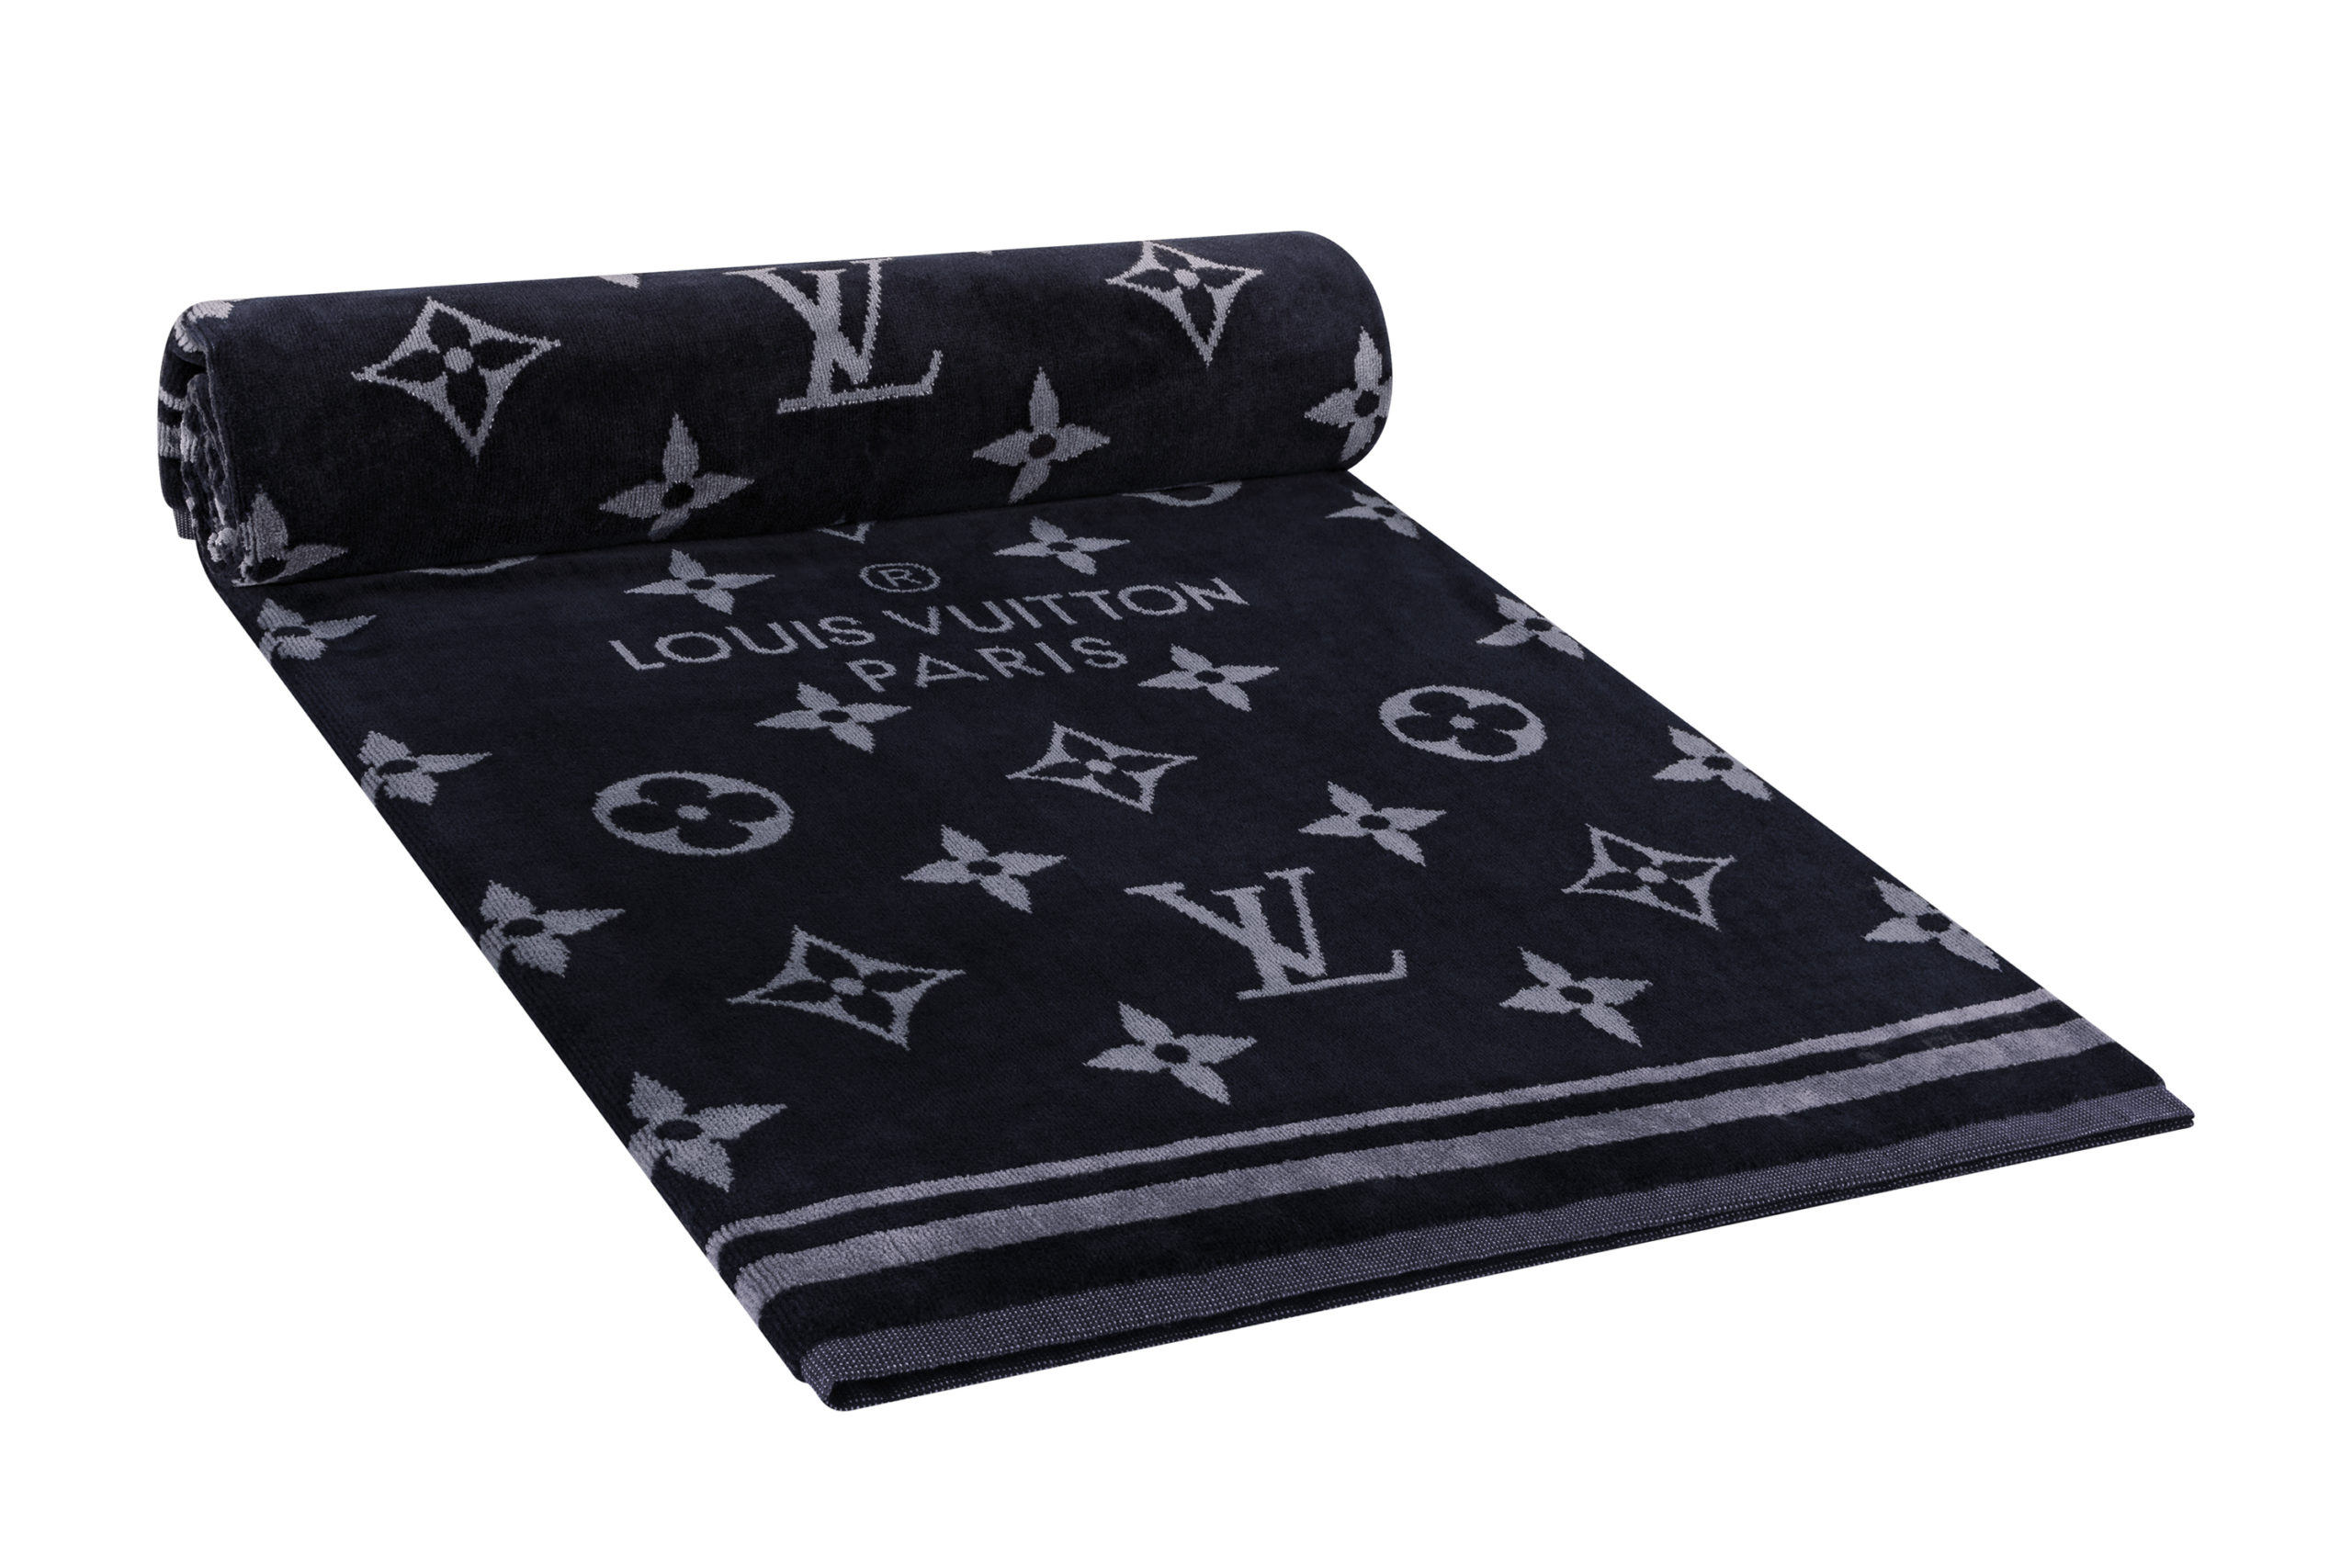 Louis Vuitton, Monogram Eclipse Beach Towel. Father's Day Gift Guide, 2022